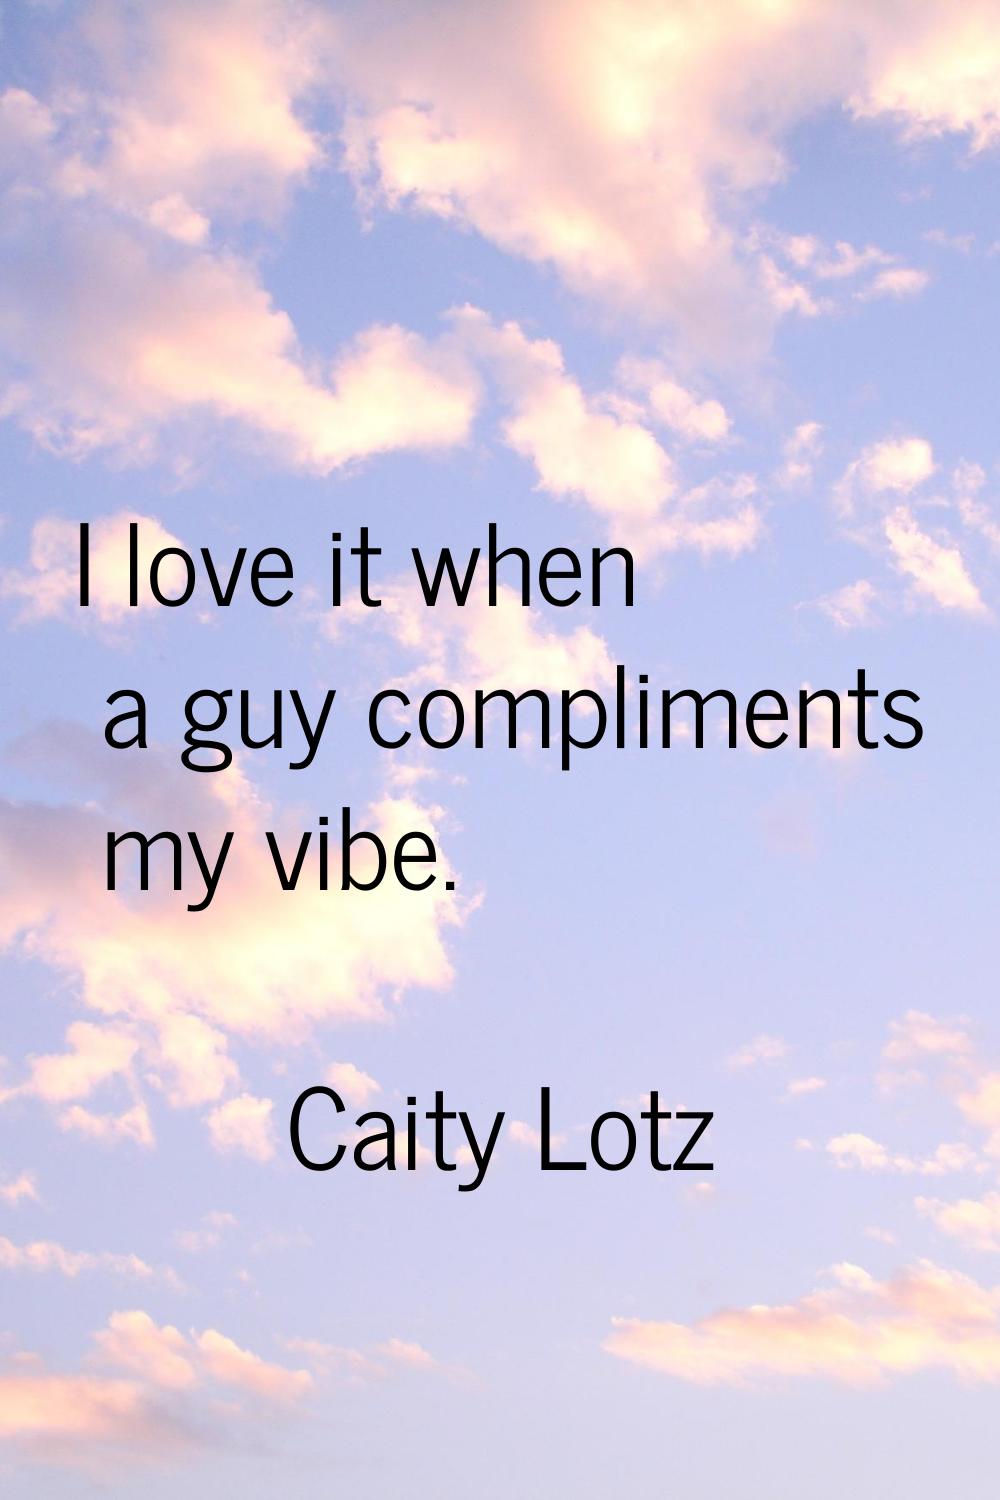 I love it when a guy compliments my vibe.